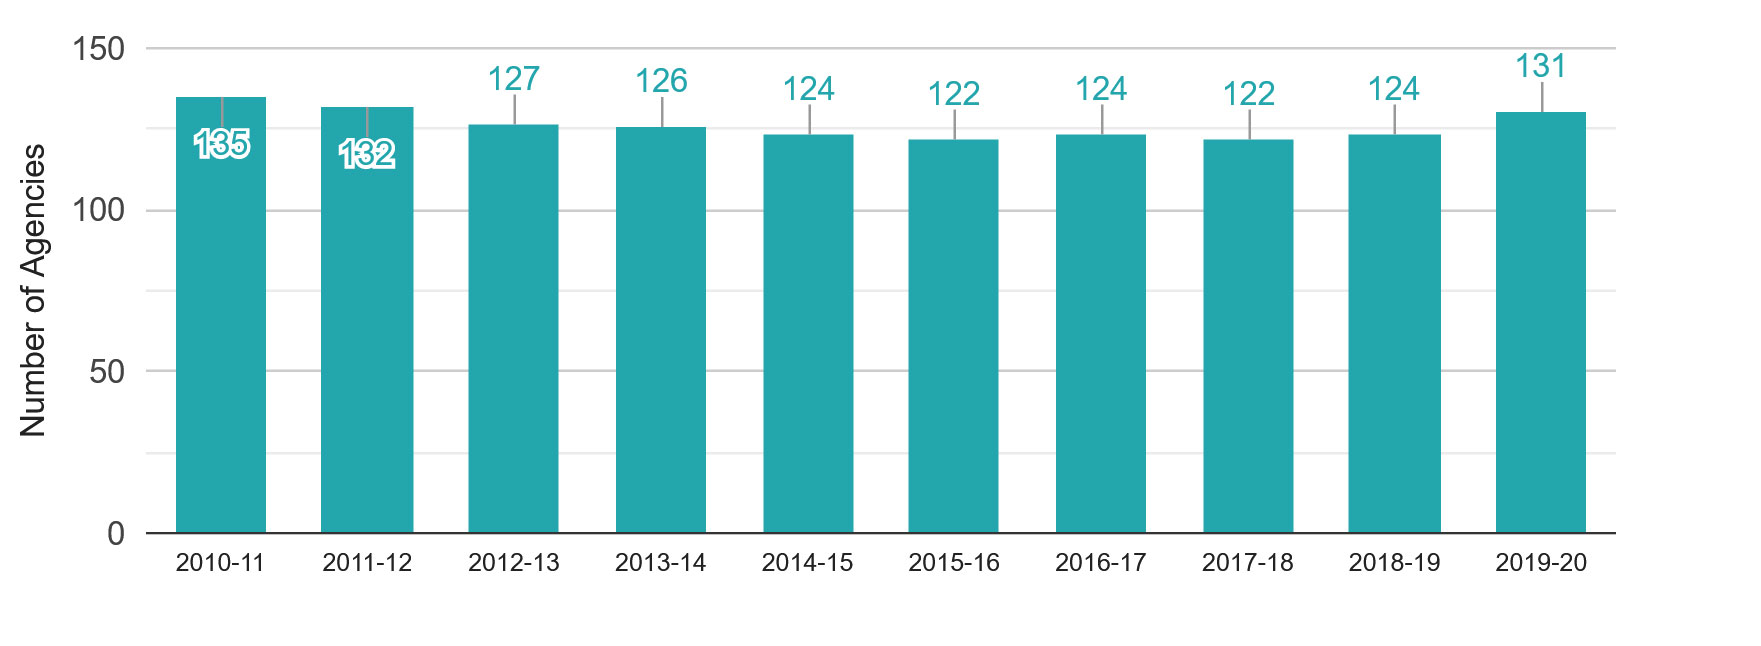 Licensed Home Child Care Agencies, 2010-11 to 2019-20